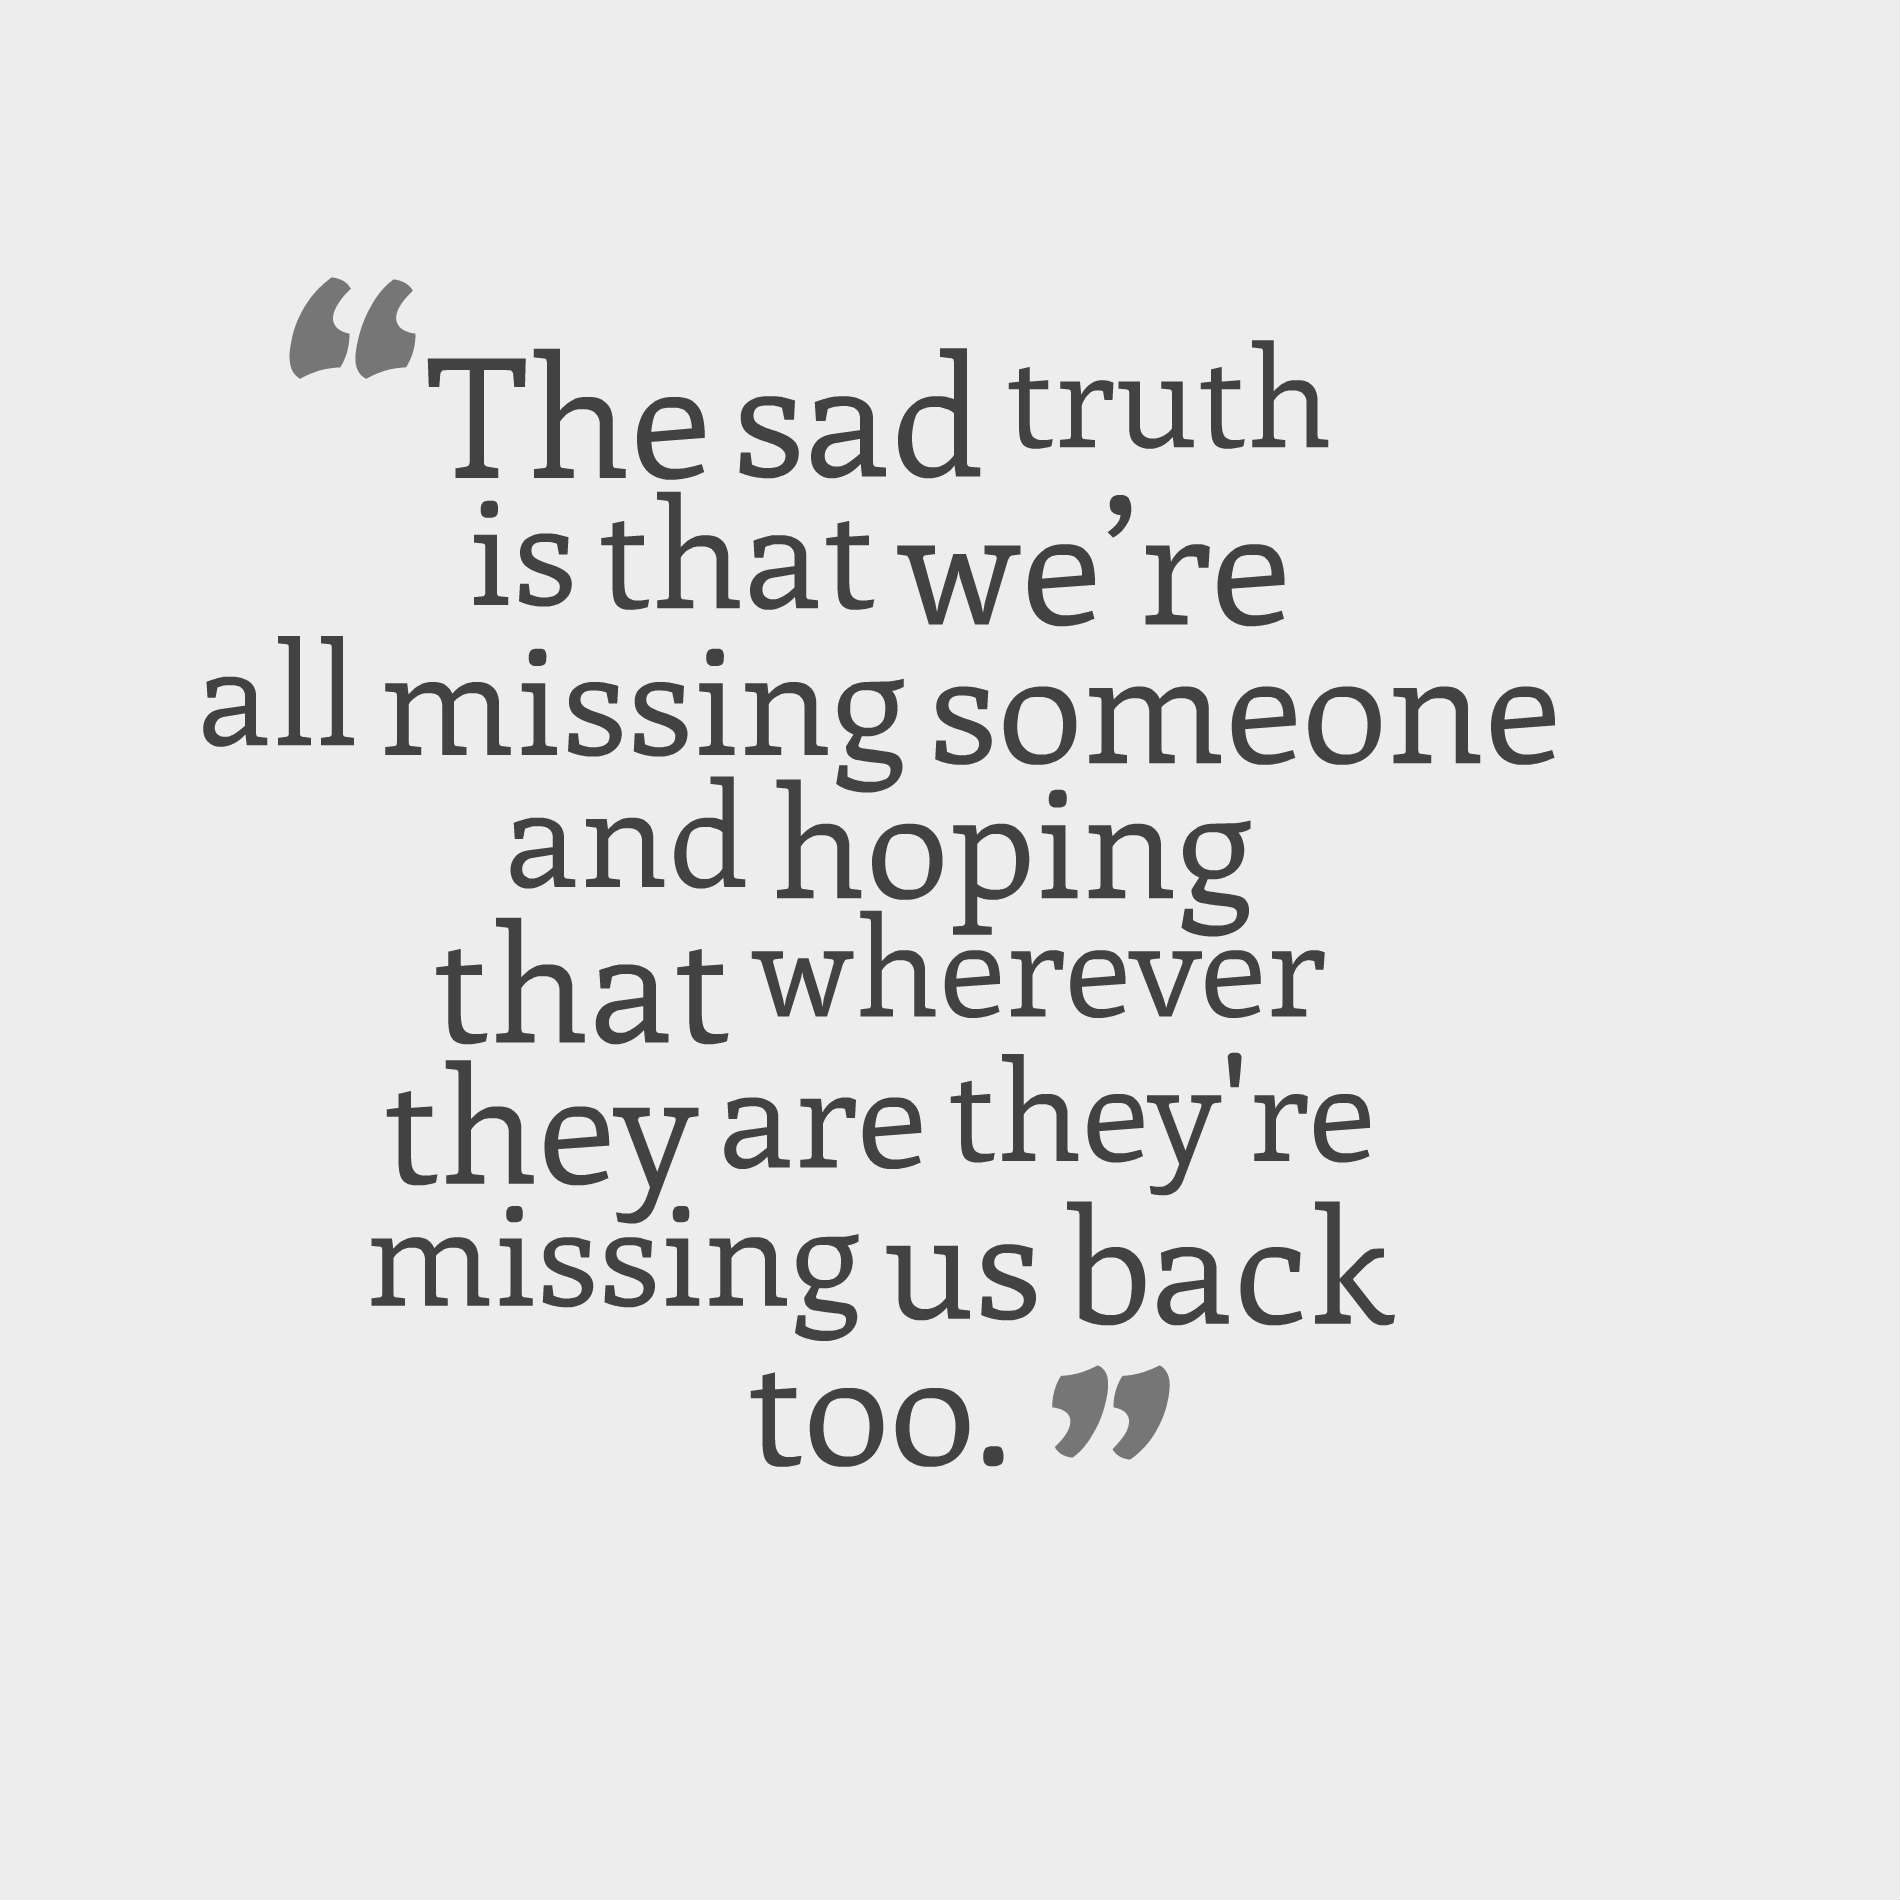 The sad truth is that we’re all missing someone and hoping that wherever they are they’re missing us back too.